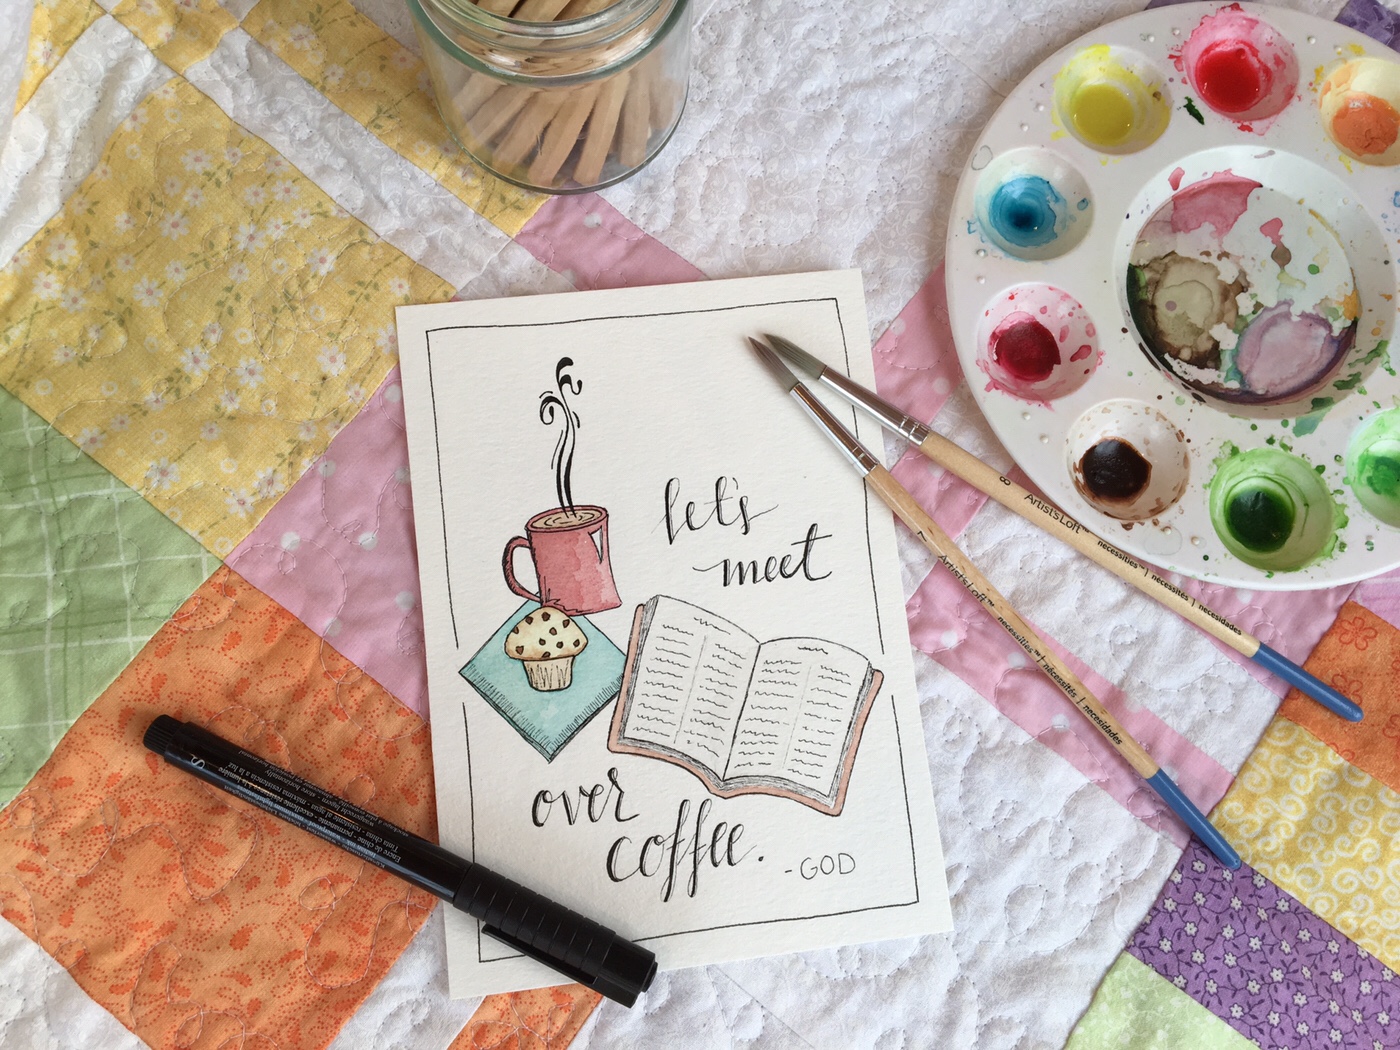 Let's meet over coffee - Hand lettered Watercolor Illustration - invitation from God card